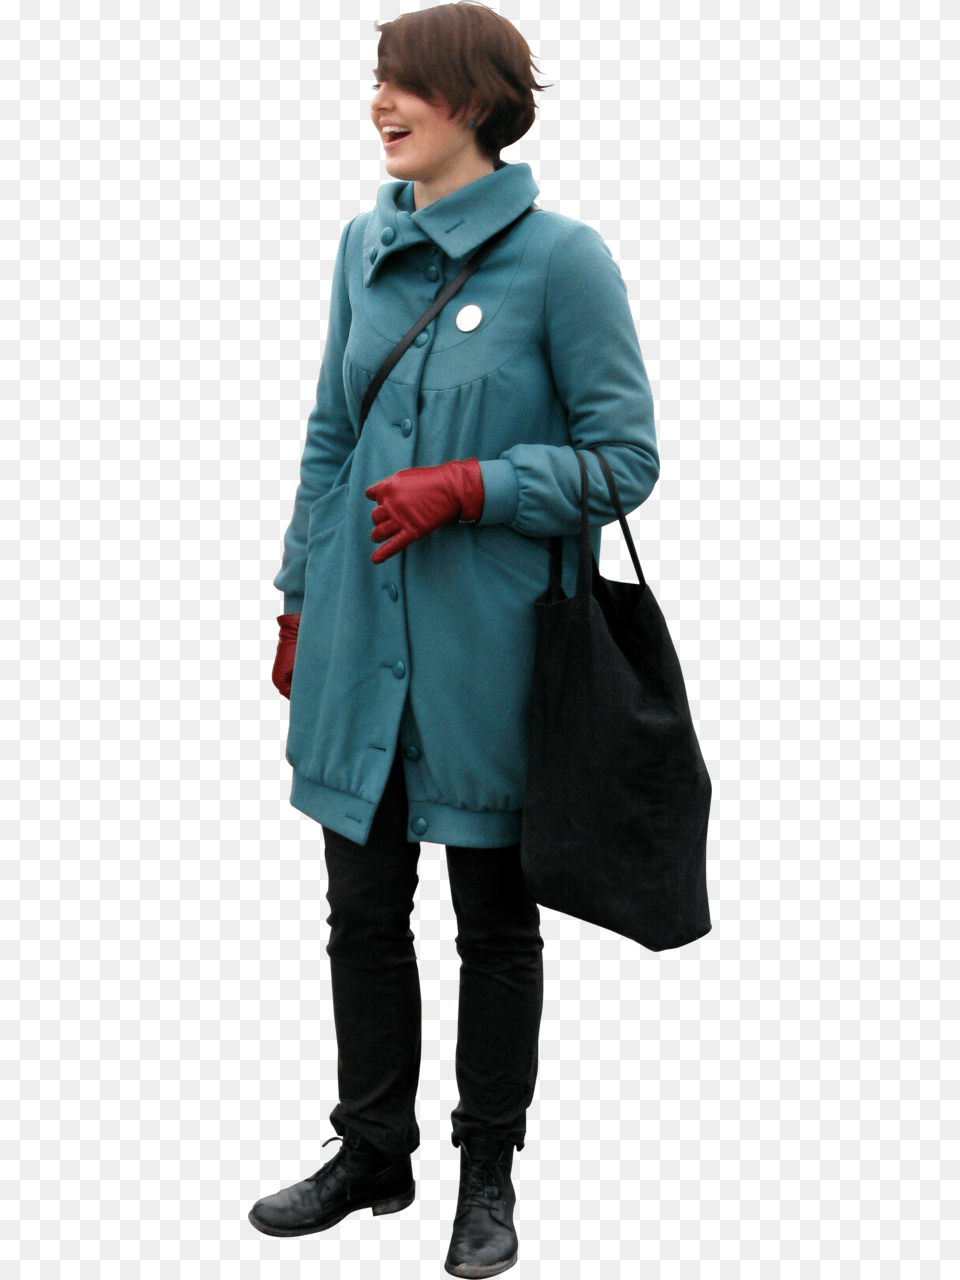 People Watching Cutout, Clothing, Coat, Overcoat, Sleeve Png Image